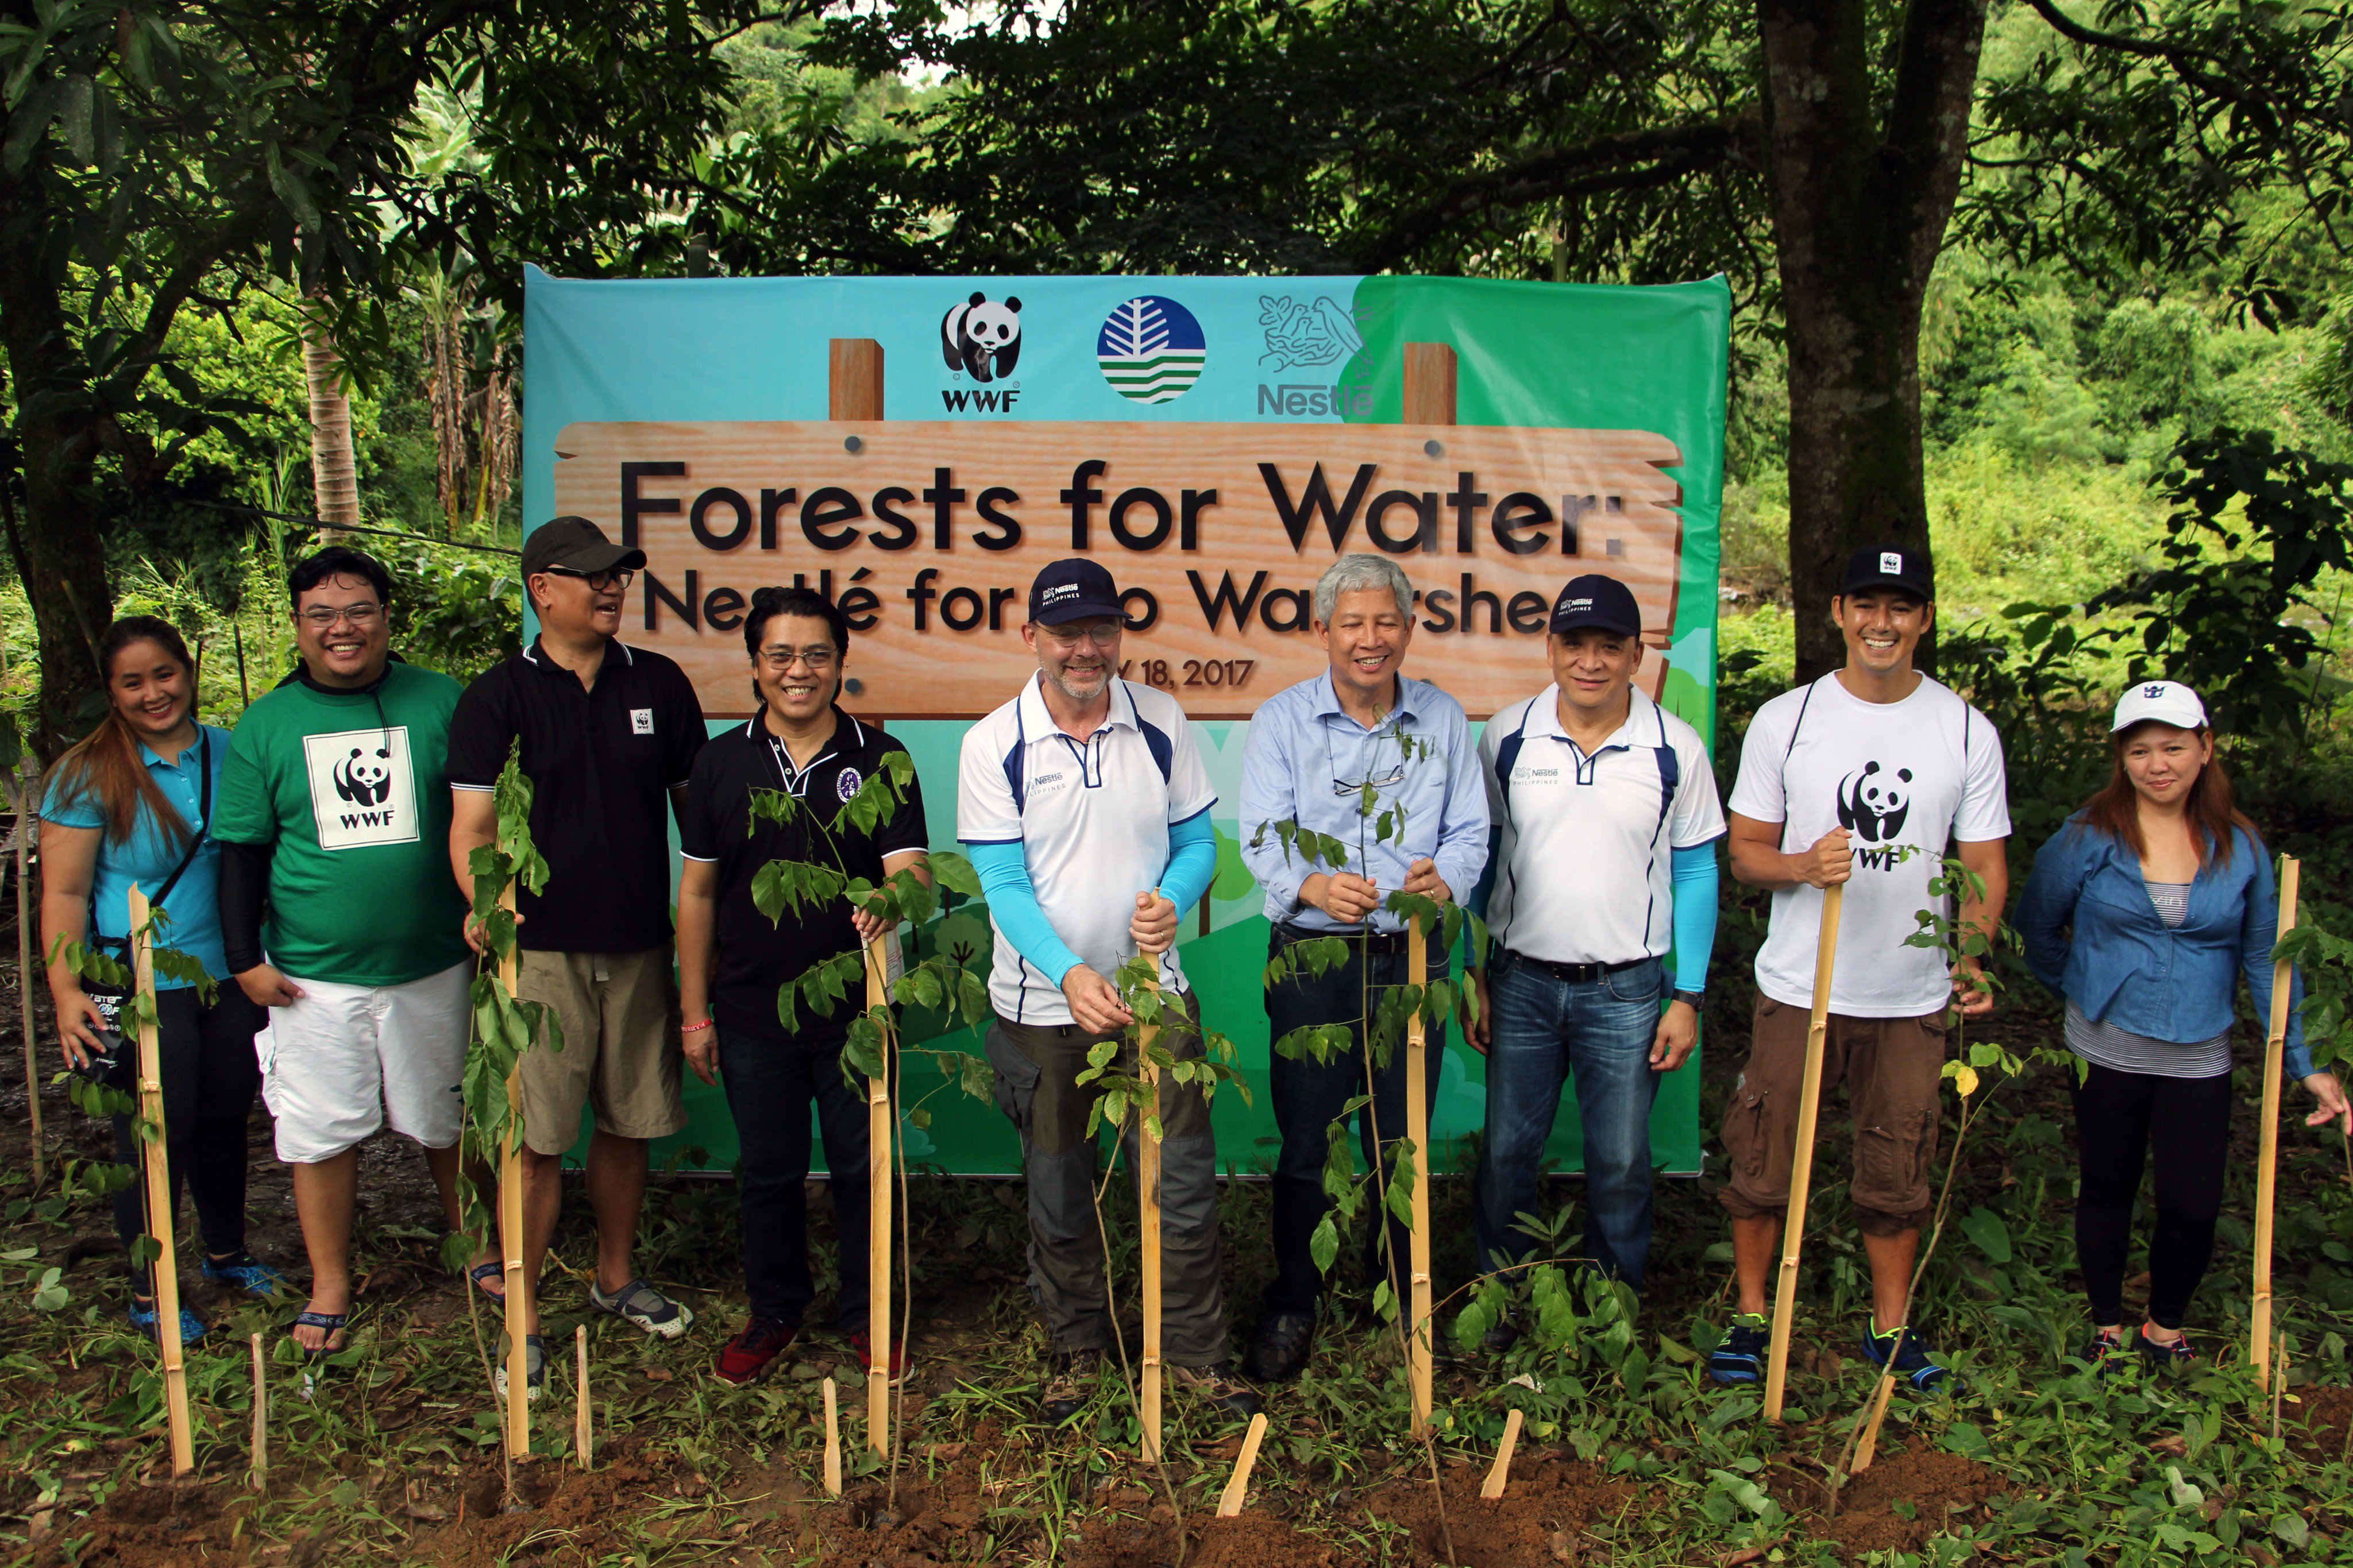 WWF-Philippines on Twitter: "Nestlé held a tree planting &amp; nurturing activity at Ipo Dam, our project on water security called Forests for Water. https://t.co/uYoThJdDdF" / Twitter